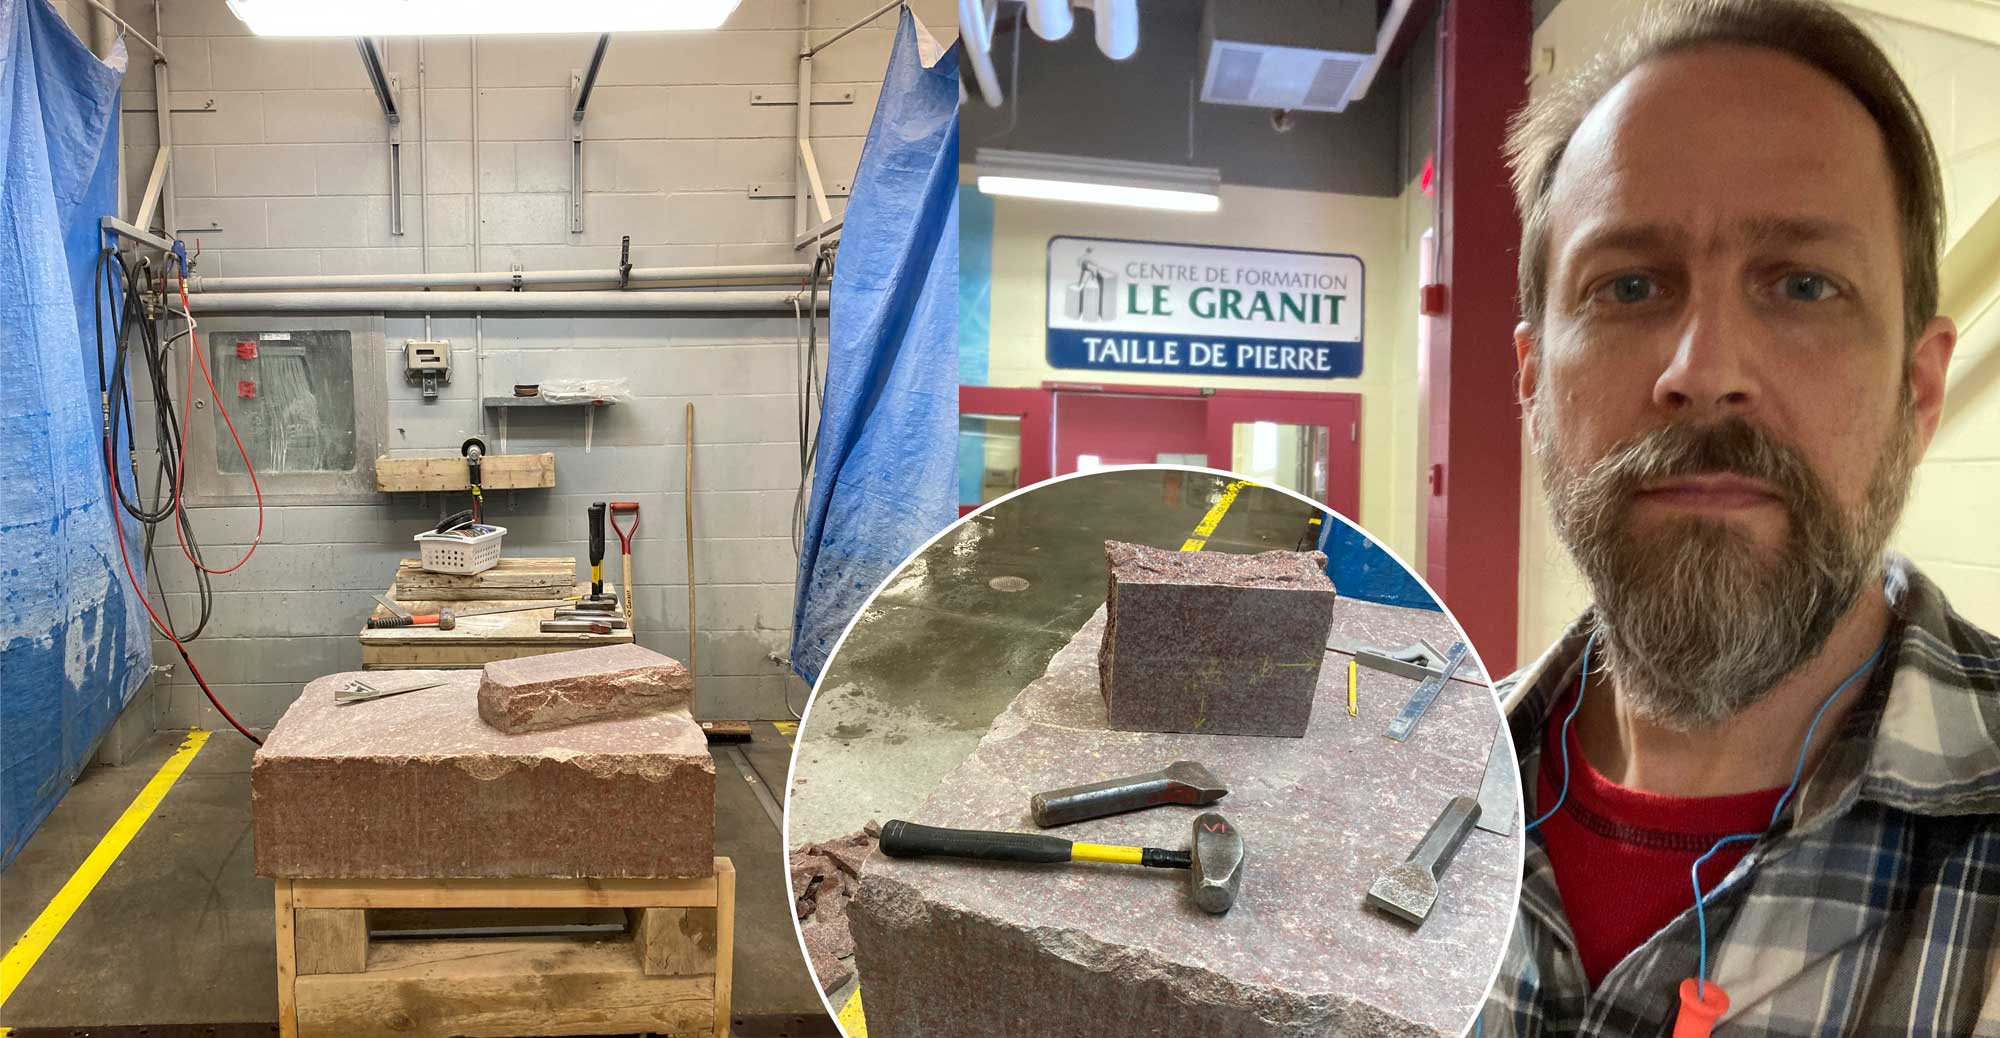 My workspace at the stonemasonry school, CFP Le Granit, using a chasse & traceur to cut straight edges on granite.